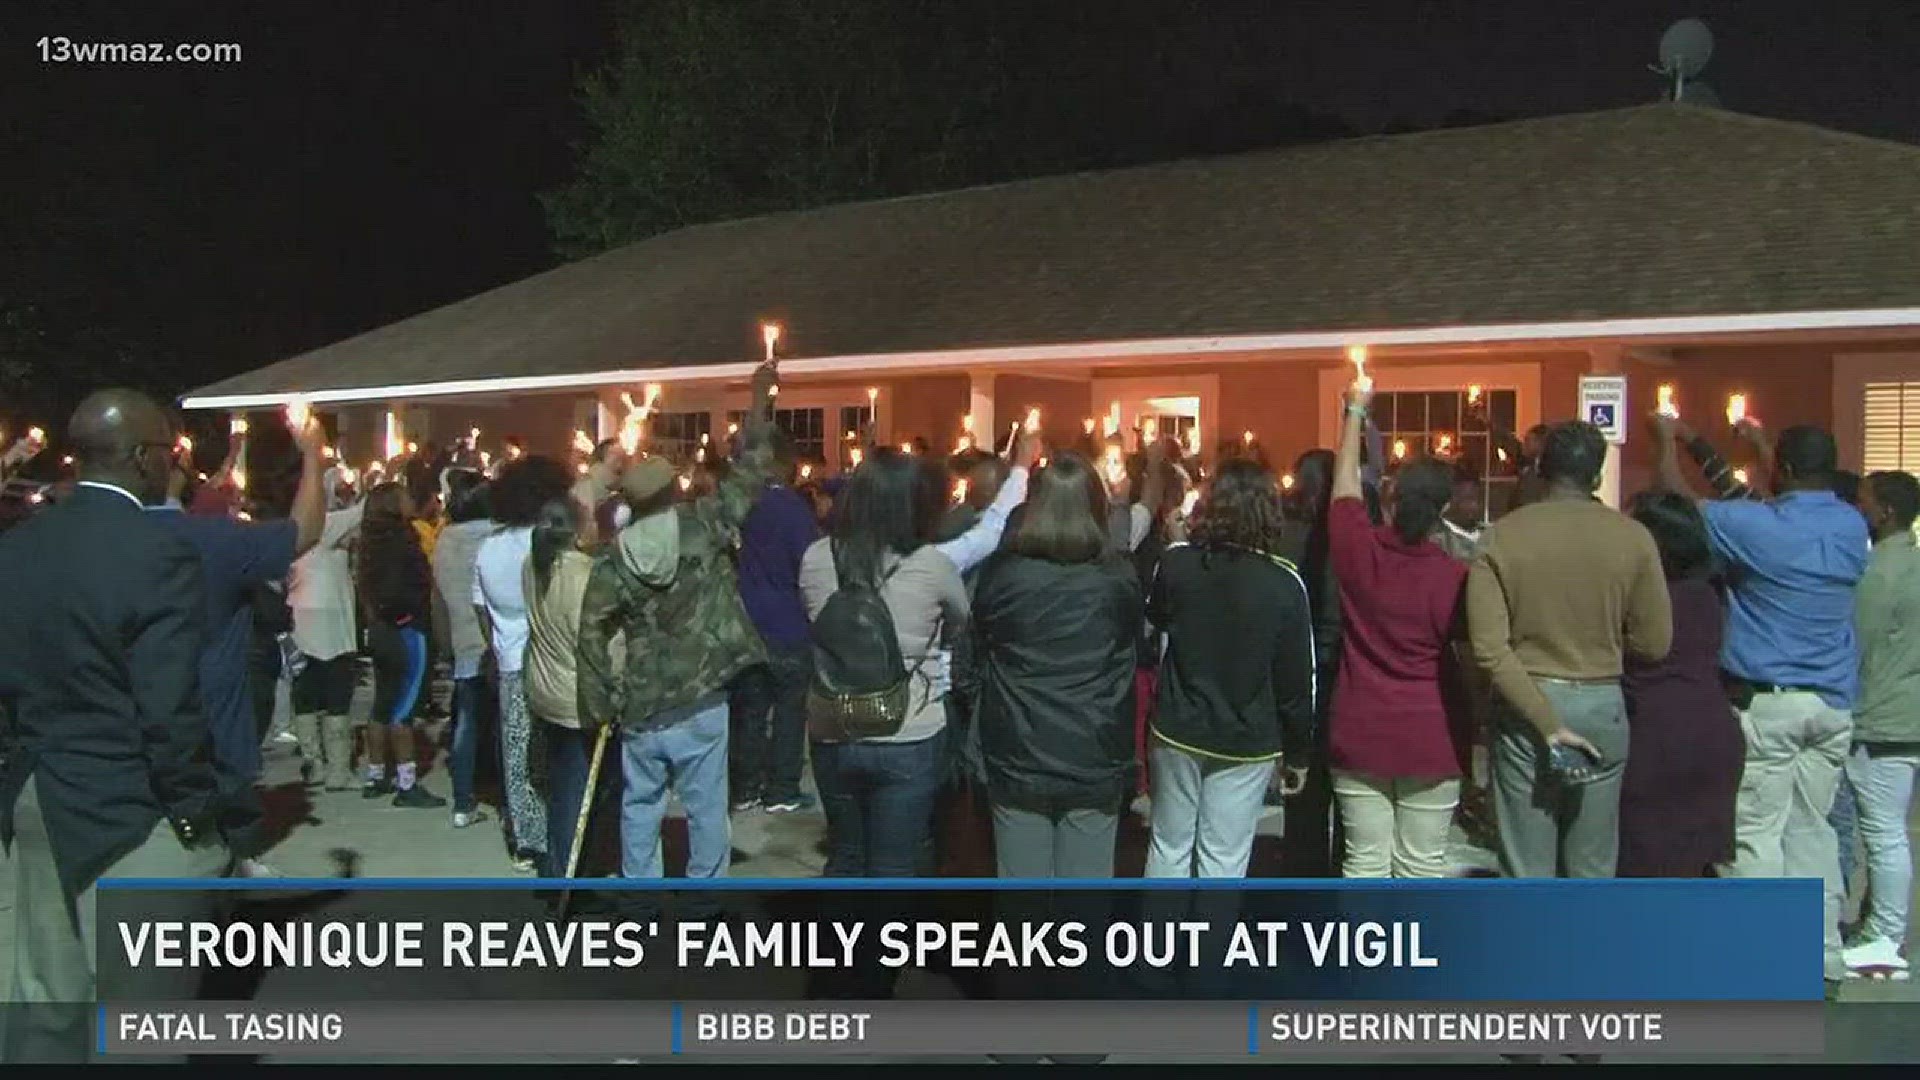 Veronique Reaves' family speaks out at vigil